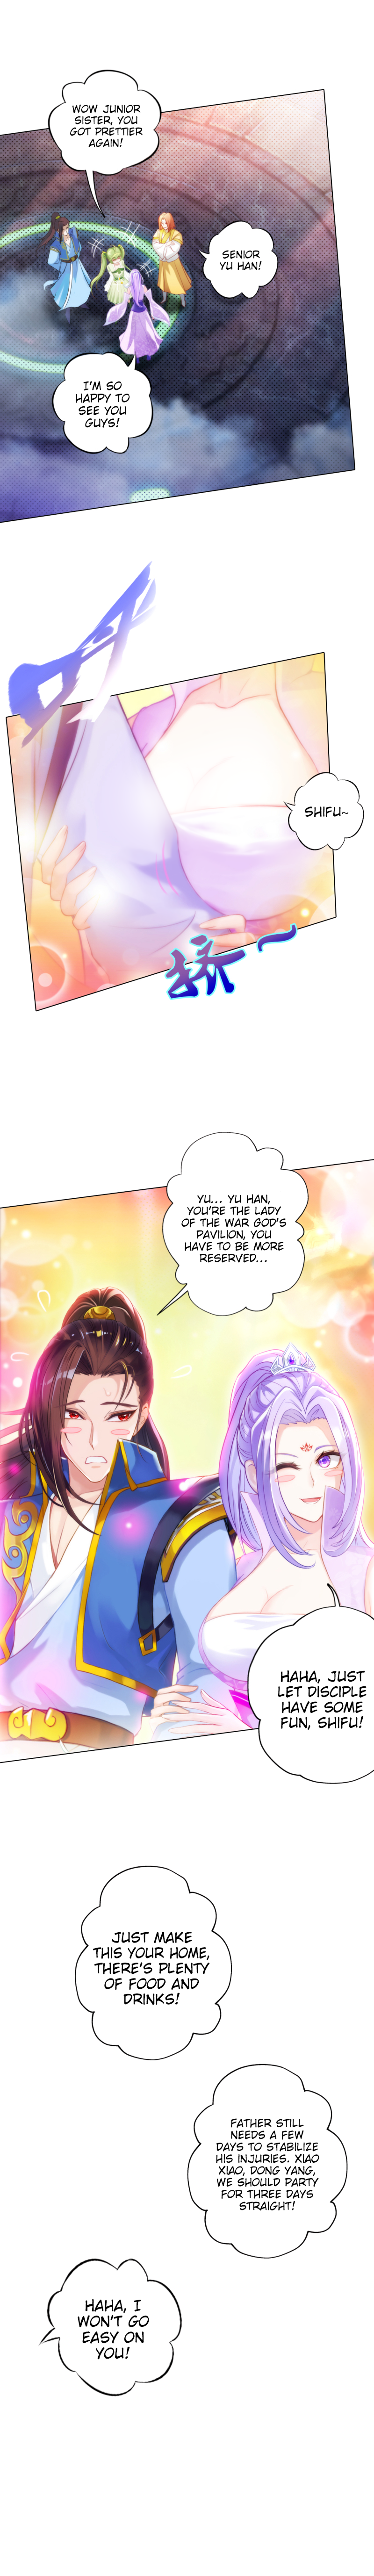 Lang Huan Library Chapter 26 page 7